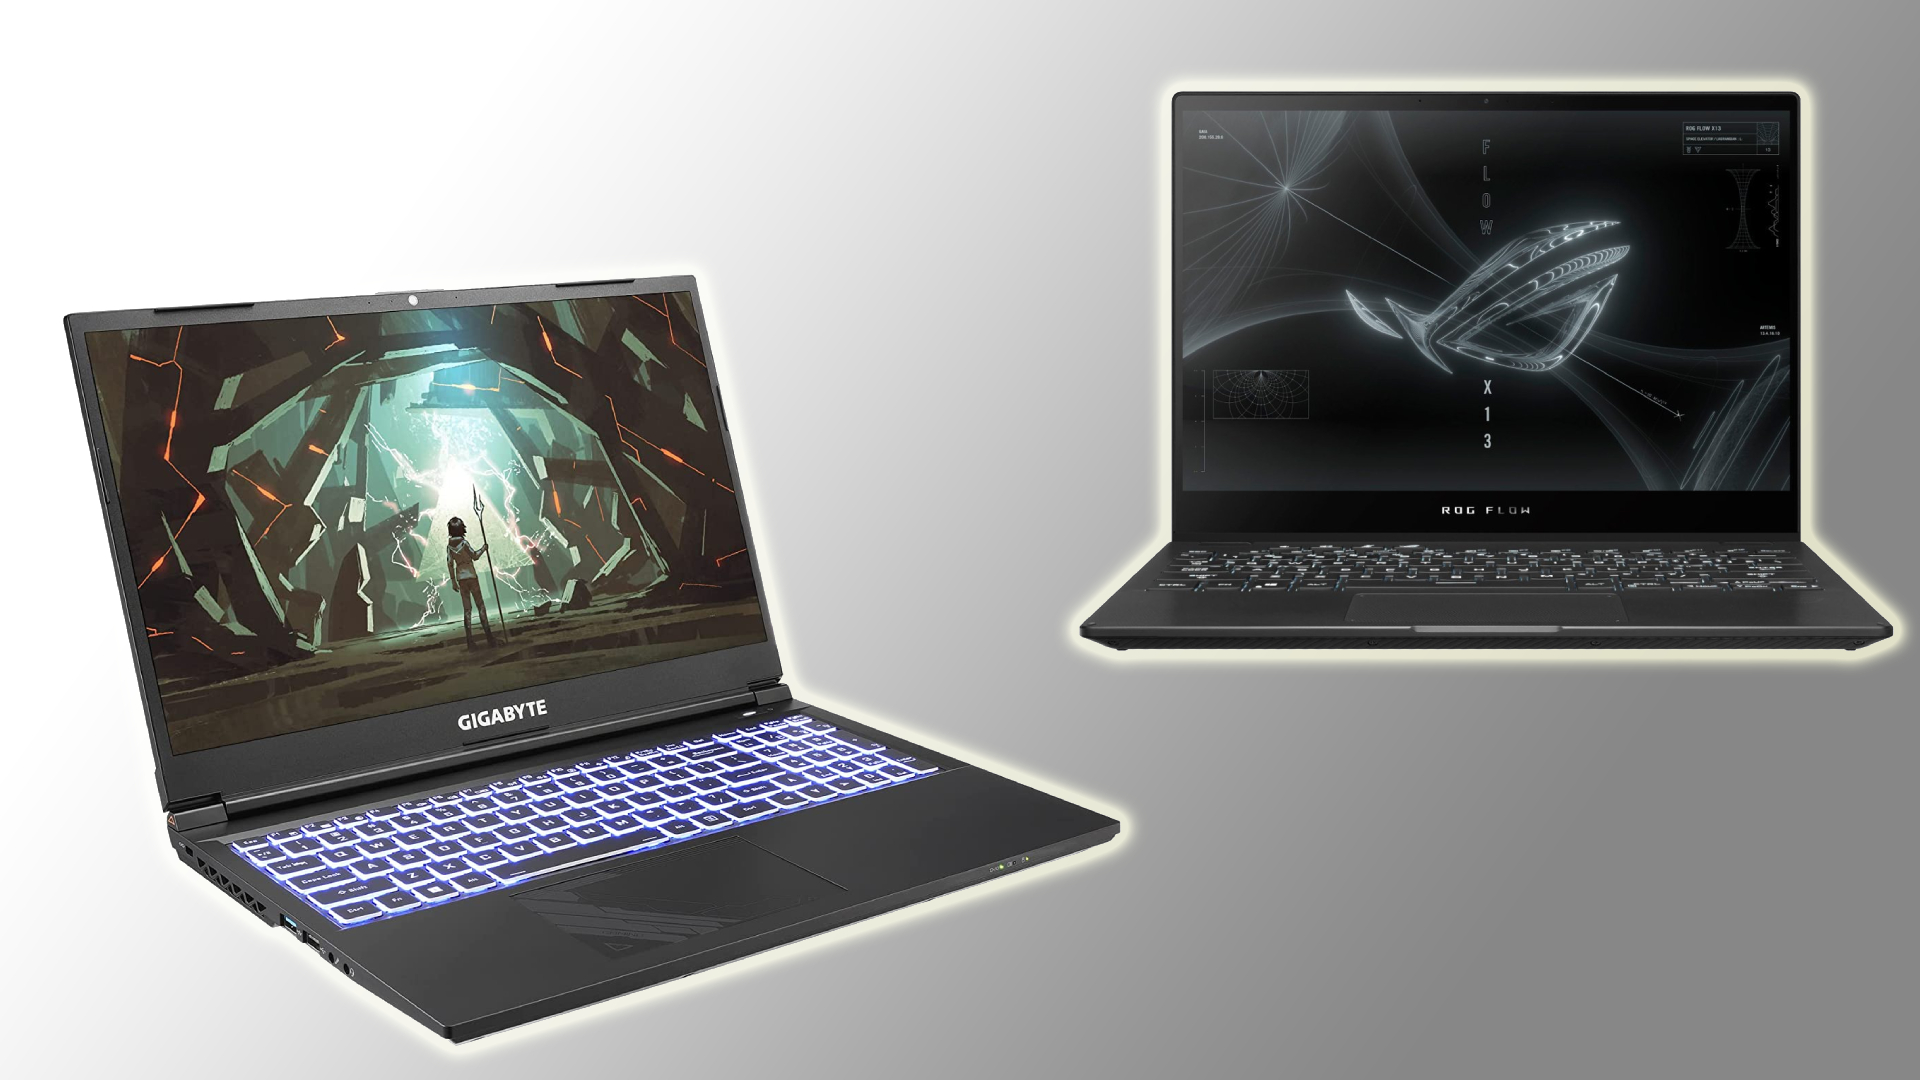 The HP Victus Ryzen Edition RTX 4060 Gaming Laptop Is Only $999.99